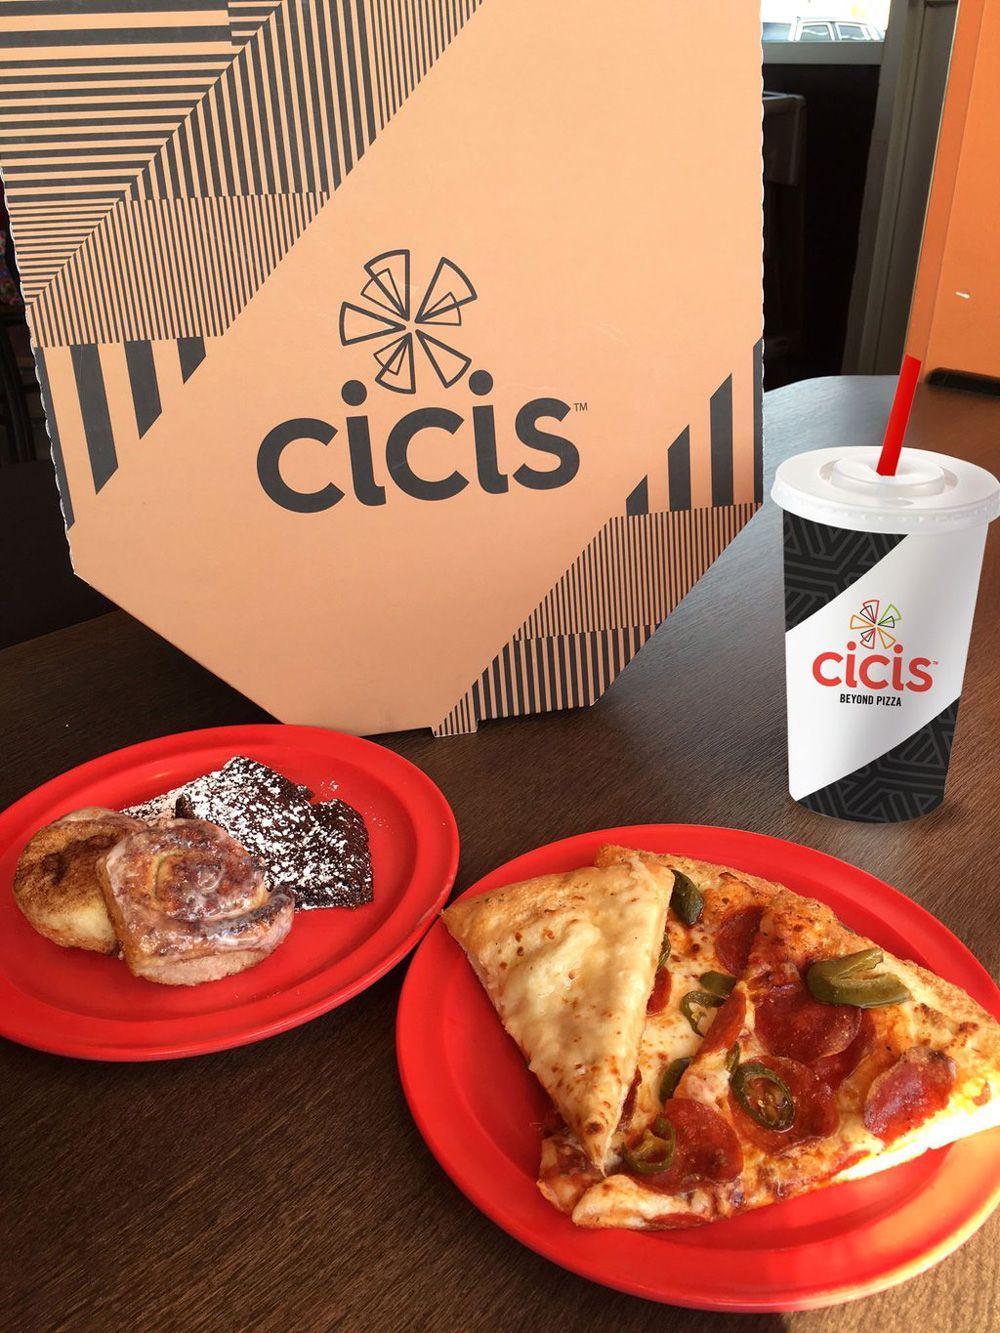 Cici's Pizza Logo - Brand New: New Name, Logo, and Identity for Cicis by Sterling-Rice Group